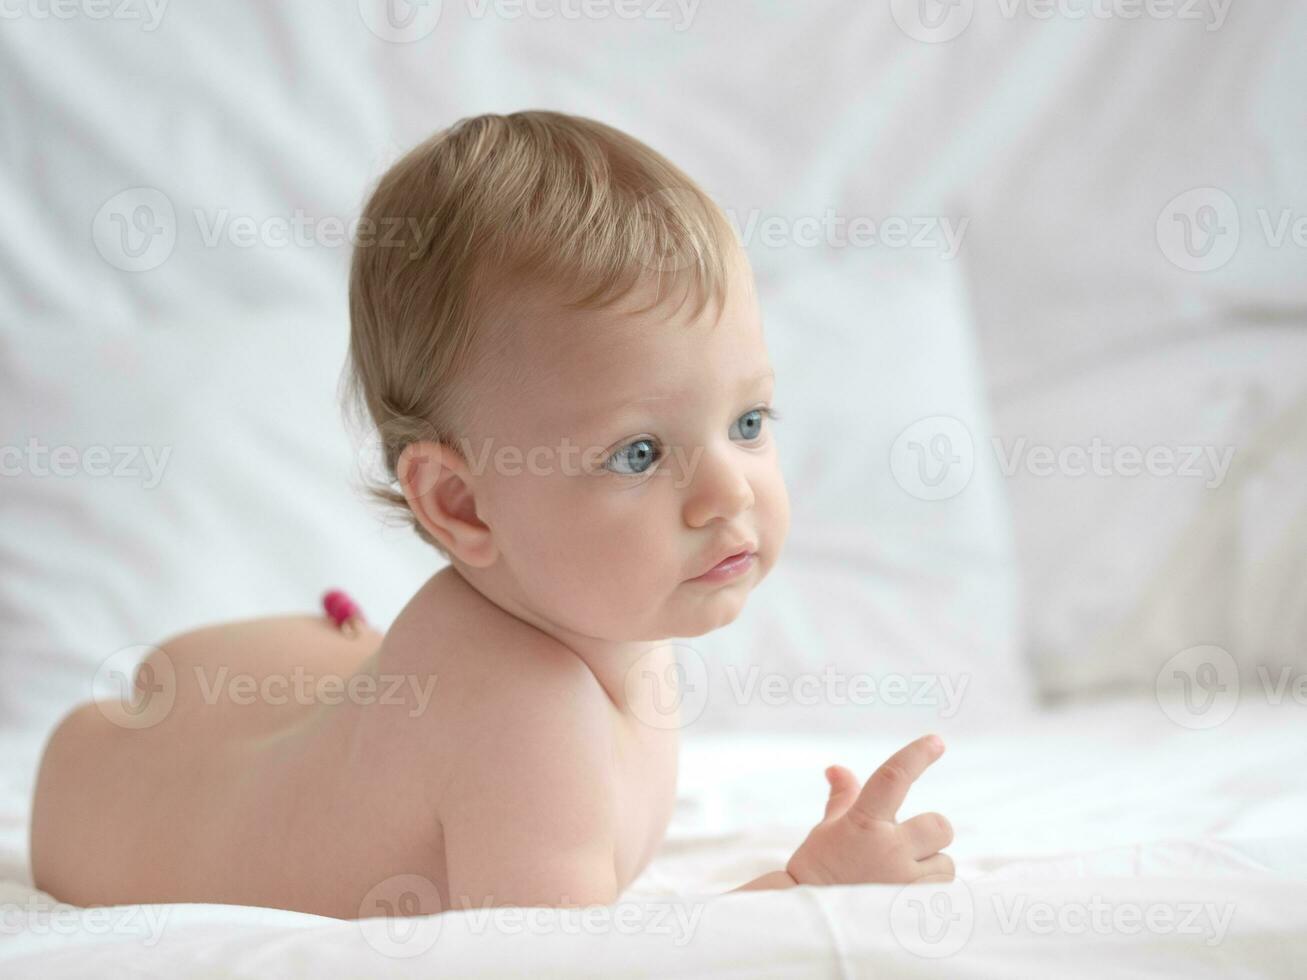 Blond Cute baby Lying on bed photo